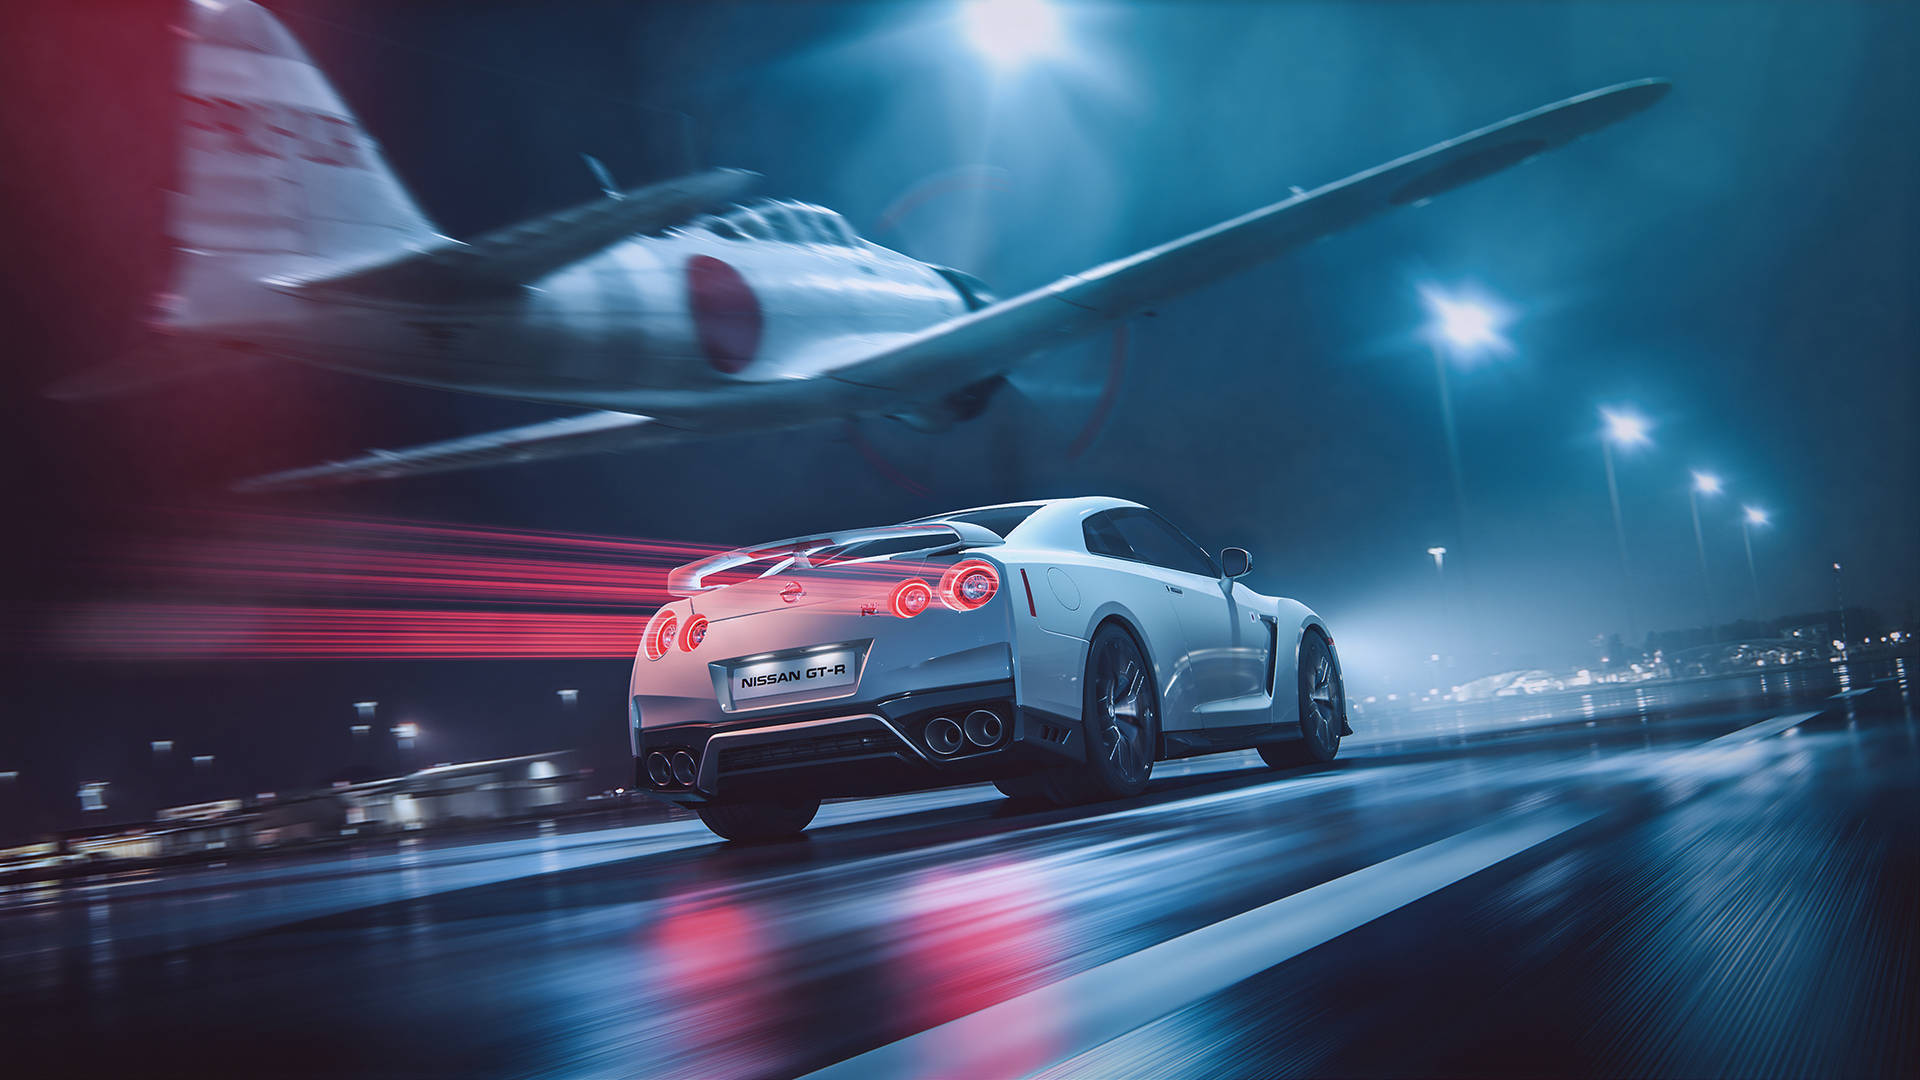 Airplane And White Nissan Gt R 4k